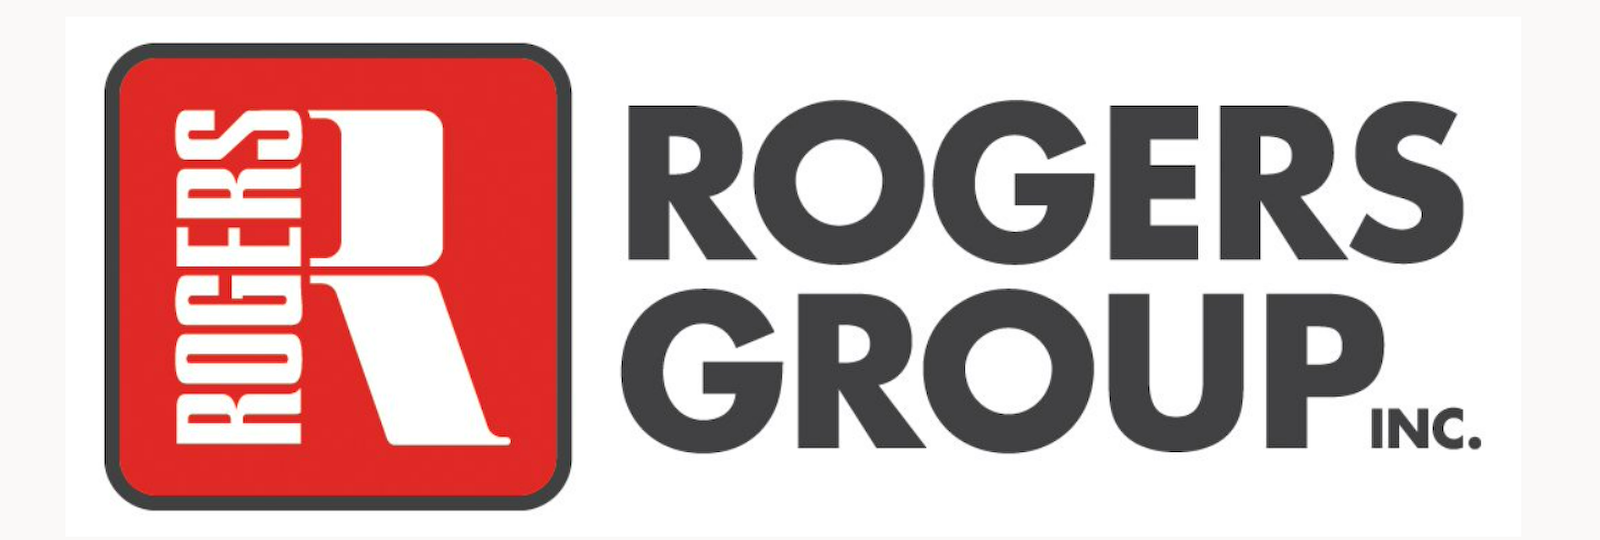 Rogers Group INC.